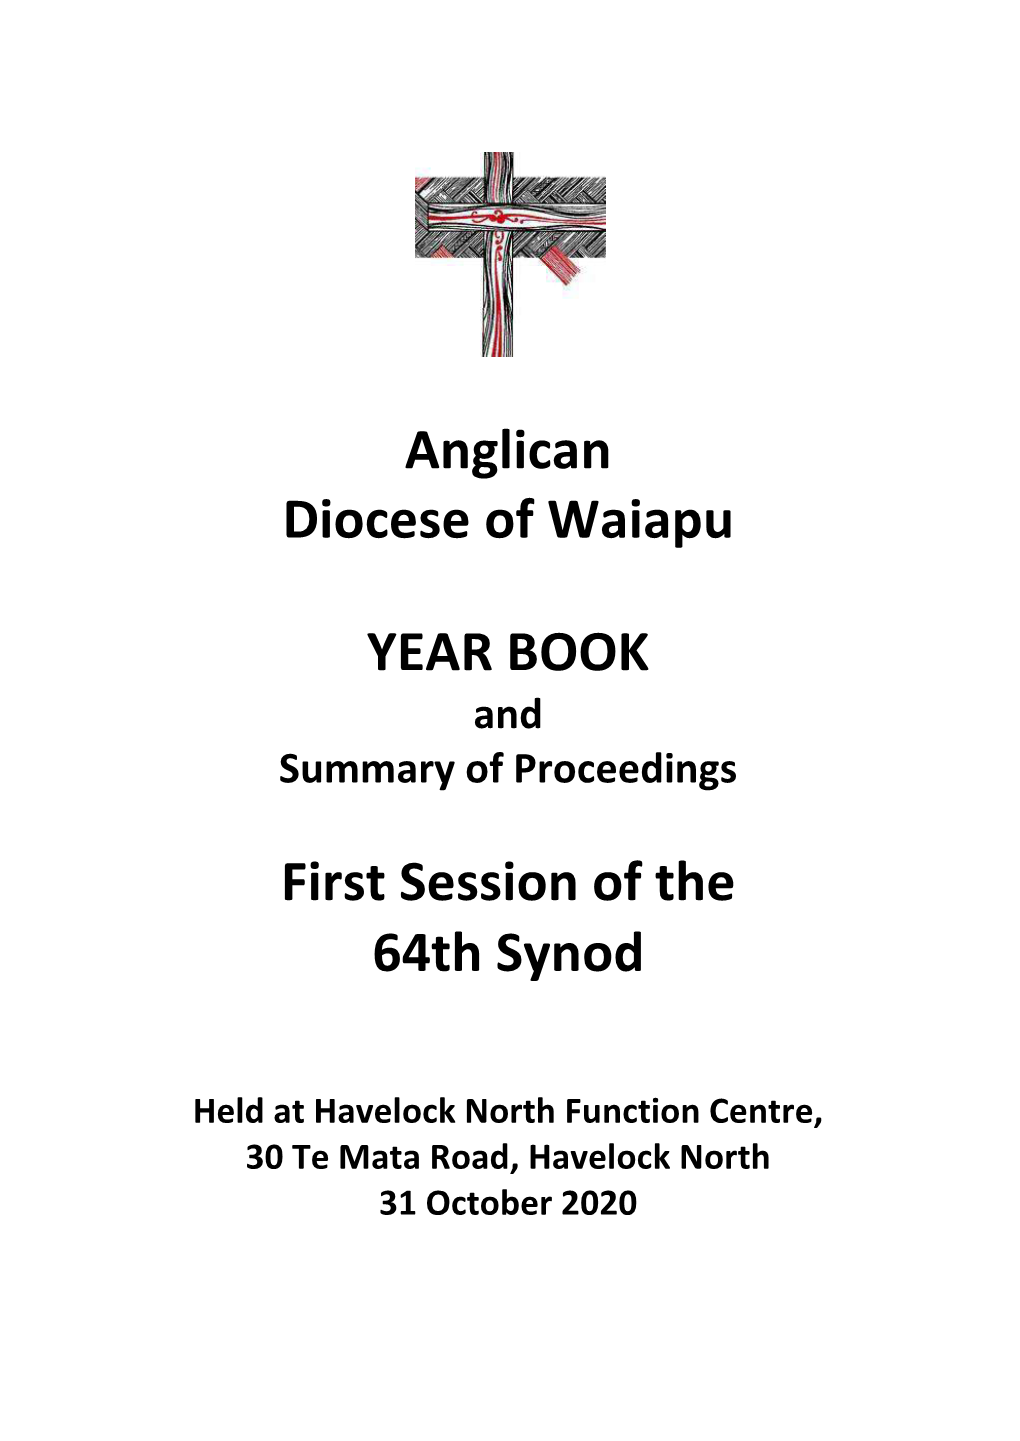 Anglican Diocese of Waiapu YEAR BOOK First Session of the 64Th Synod